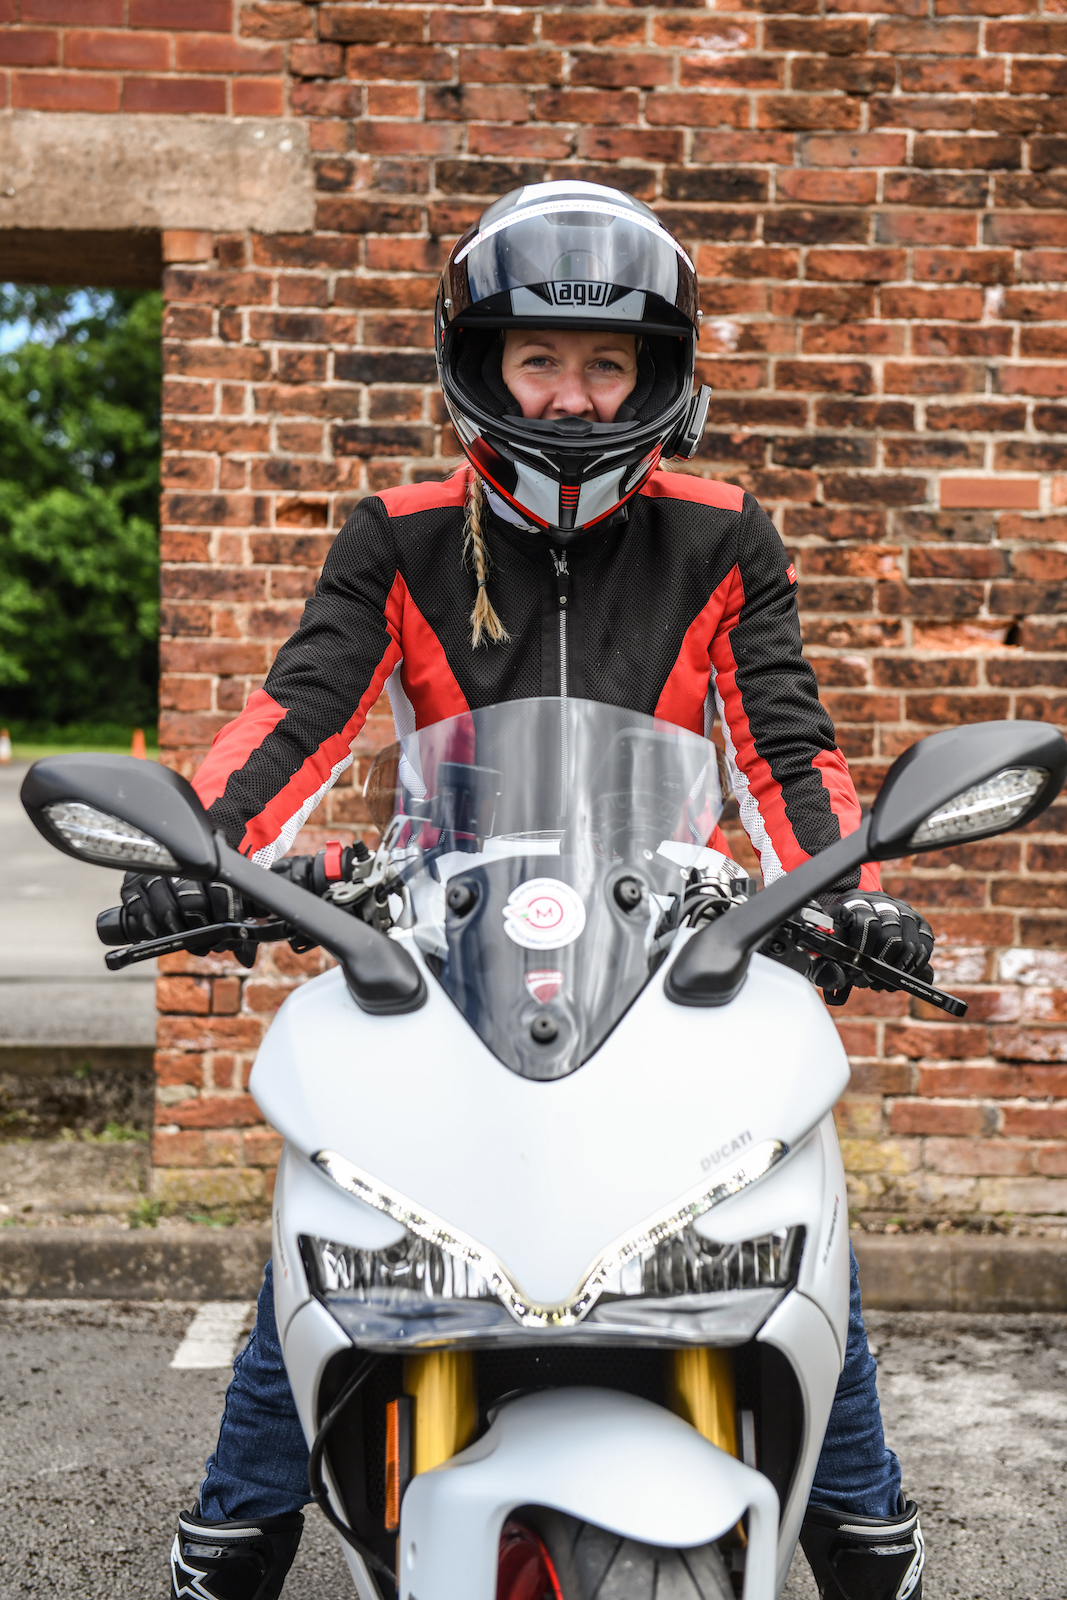 Maja Kenney from Maja's Motorcycle Adventures, on her Ducati SuperSport S